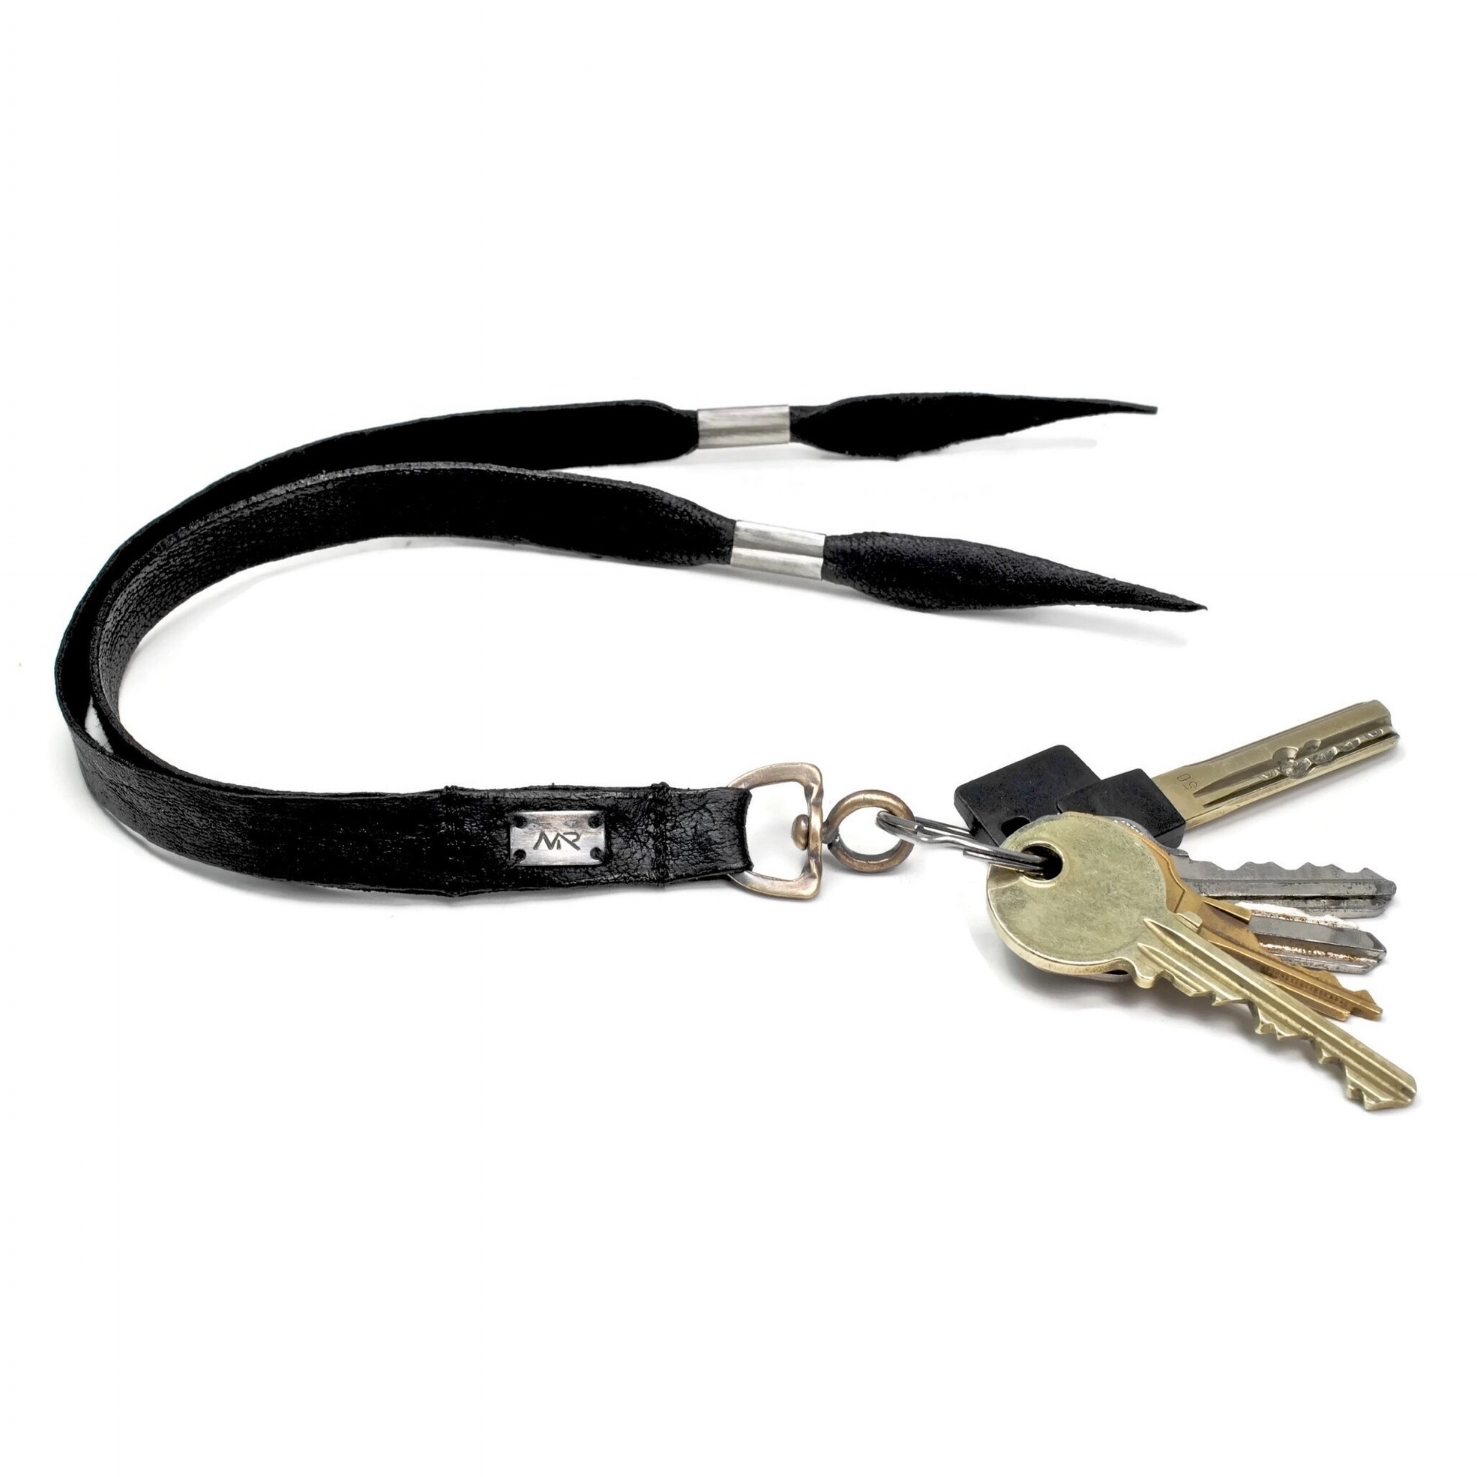 Leather_Strap_Key_Chain_2_preview.JPG